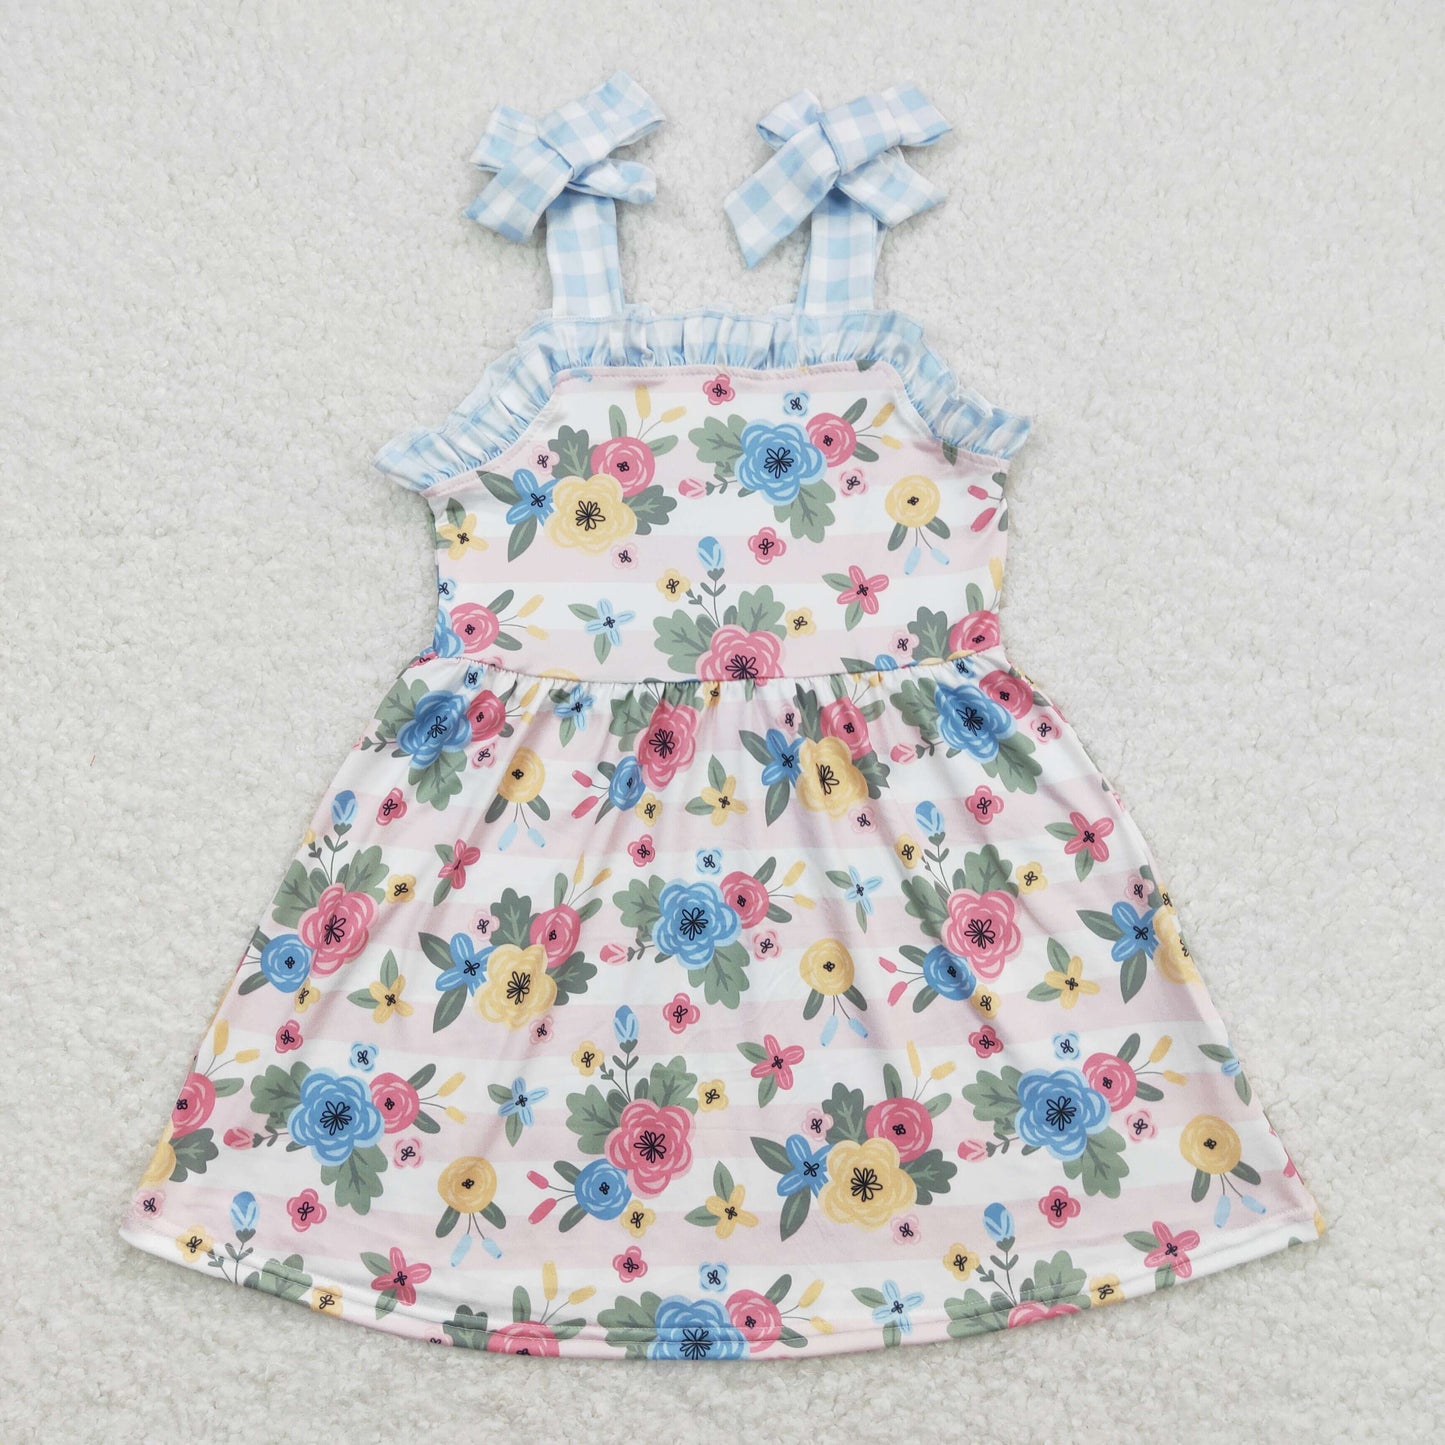 GSD0803 Floral pink striped blue and white plaid lace suspender dress ...